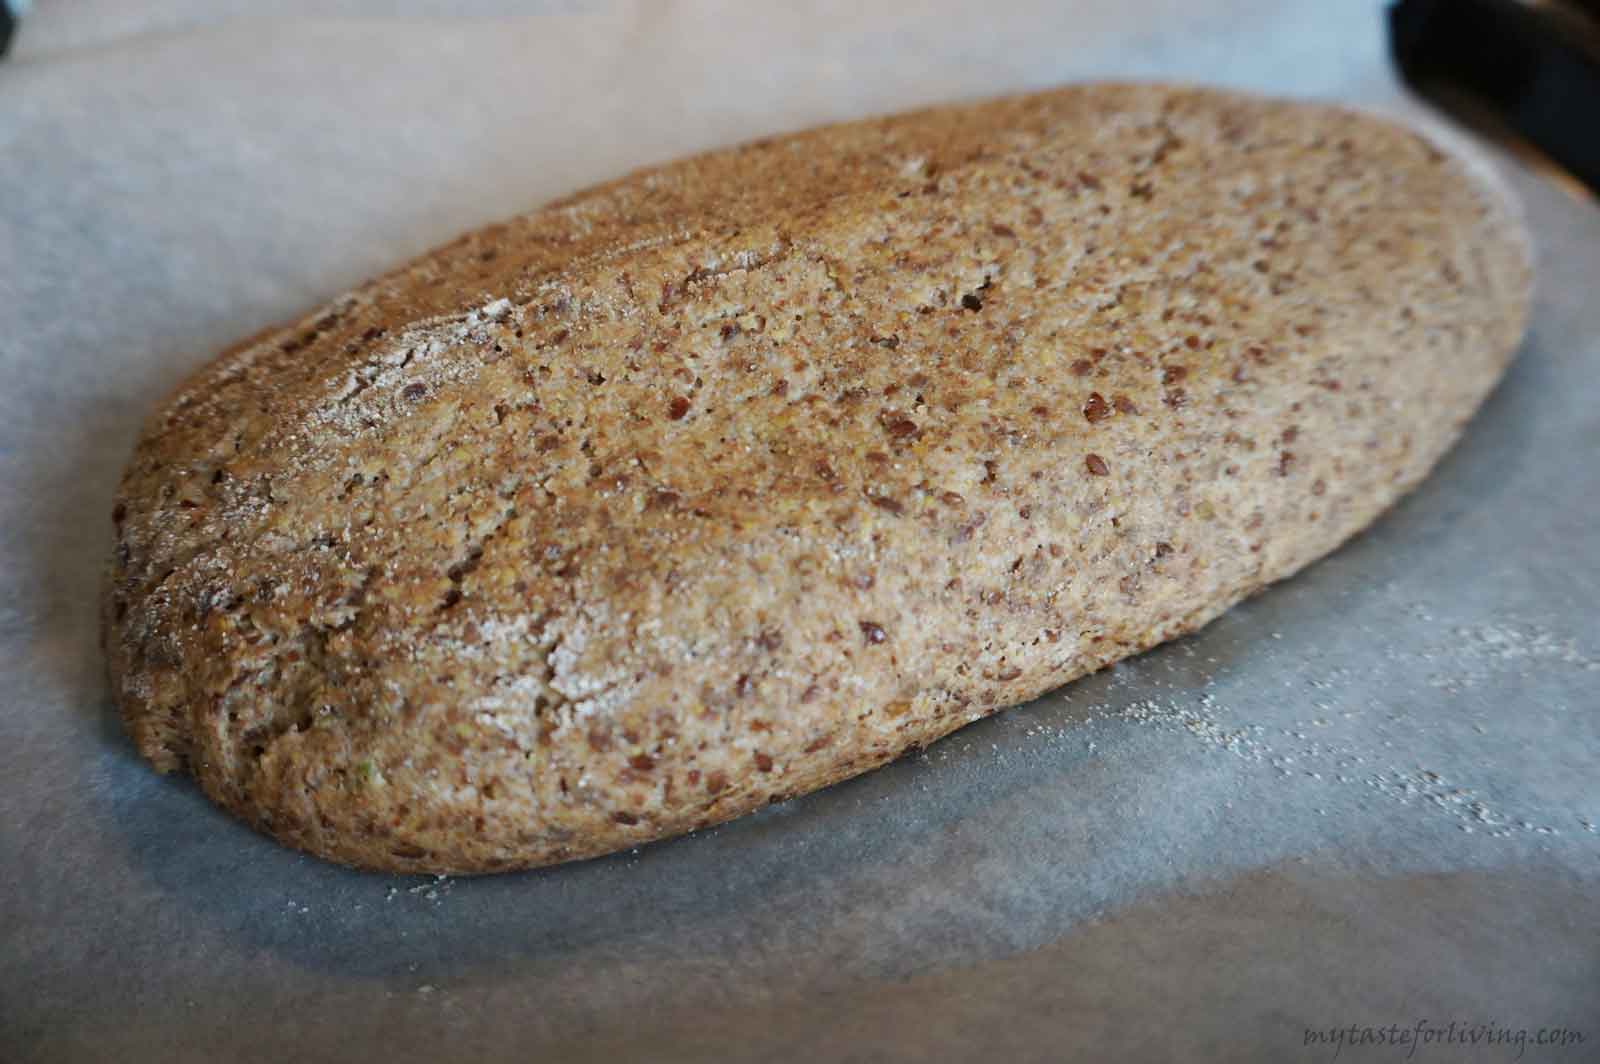 I often make this wholemeal spelt bread with flaxseed and it is one of my favorites. It's prepared very quickly. I adore a toasted slice of it with butter or avocado with tomato and onion.